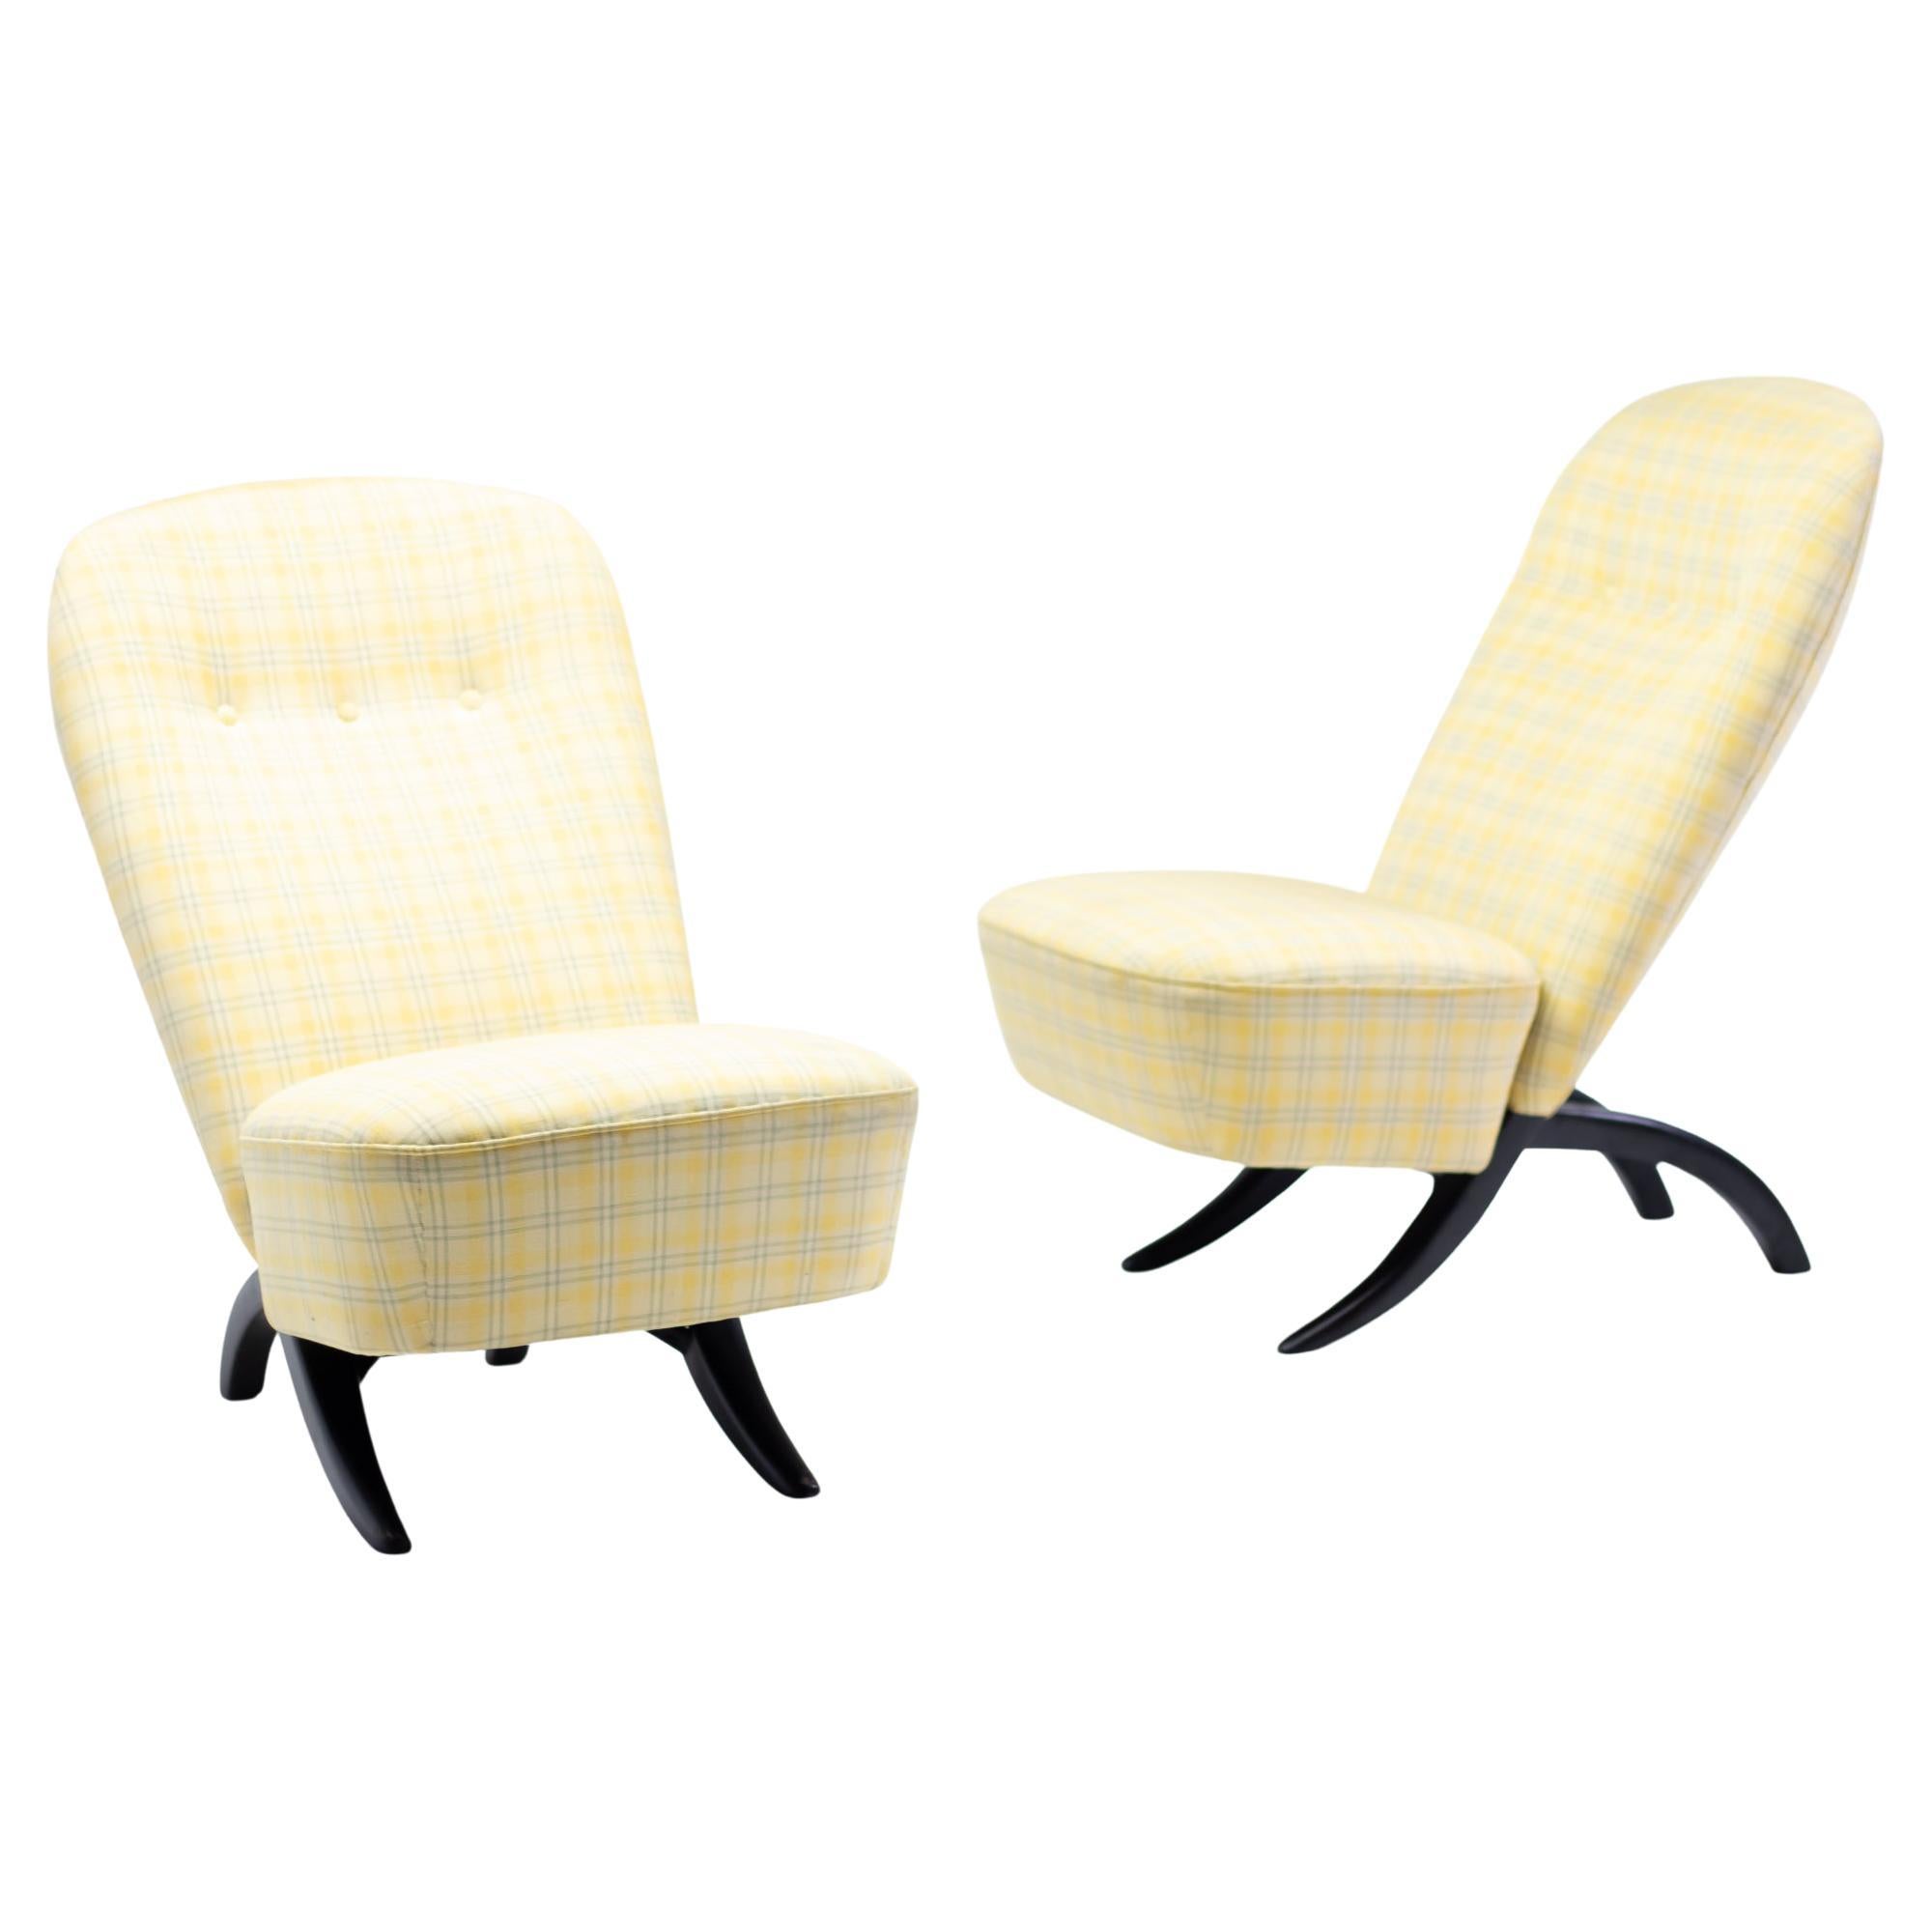 Theo Ruth for Artifort 'Congo' Easy Chairs in Checkered Yellow